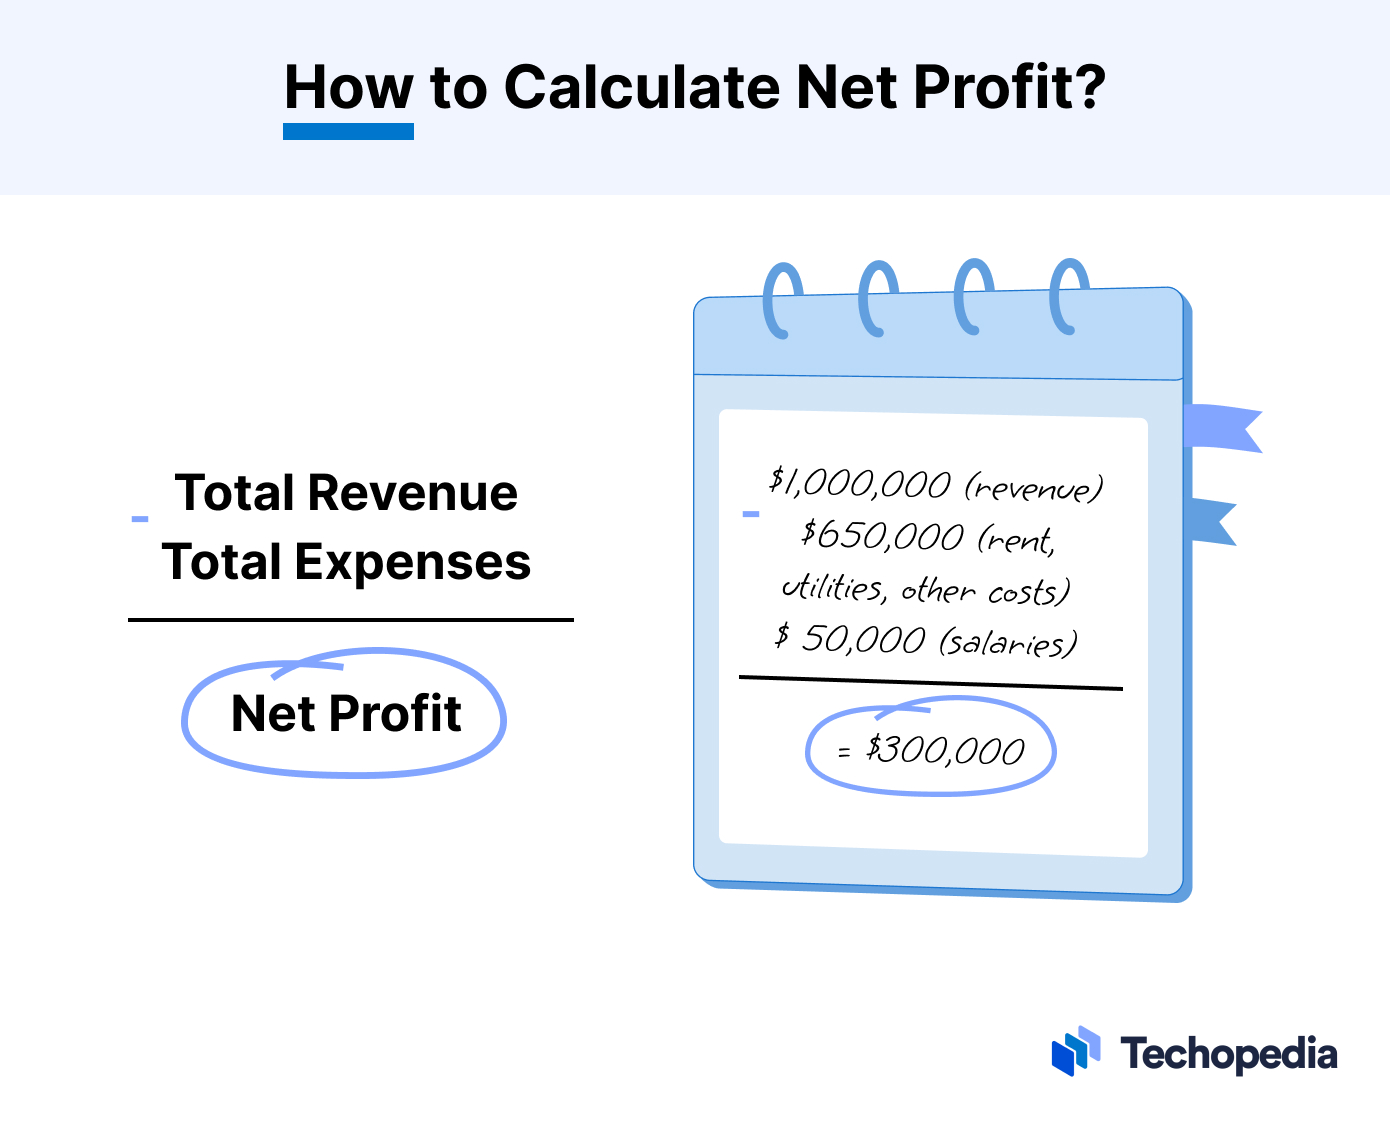 How to Calculate Net Profit?